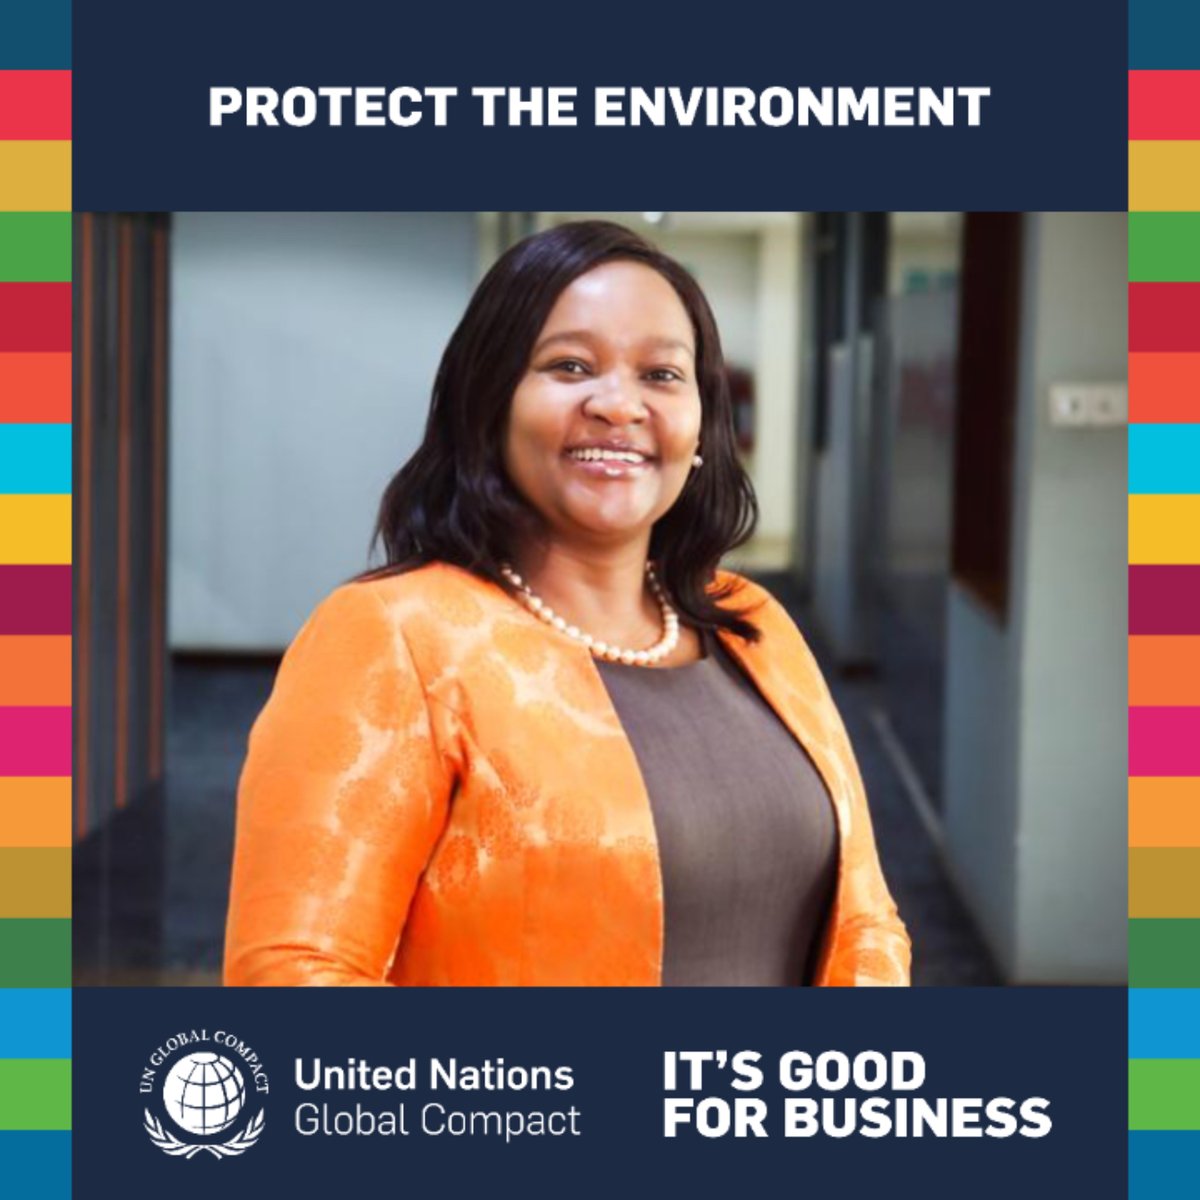 It's #goodforbusiness to protect the environment! Join me in advocating for the #TenPrinciples of the UN Global Compact and the #GlobalGoals. #UnitingBusiness #EnergyChampion